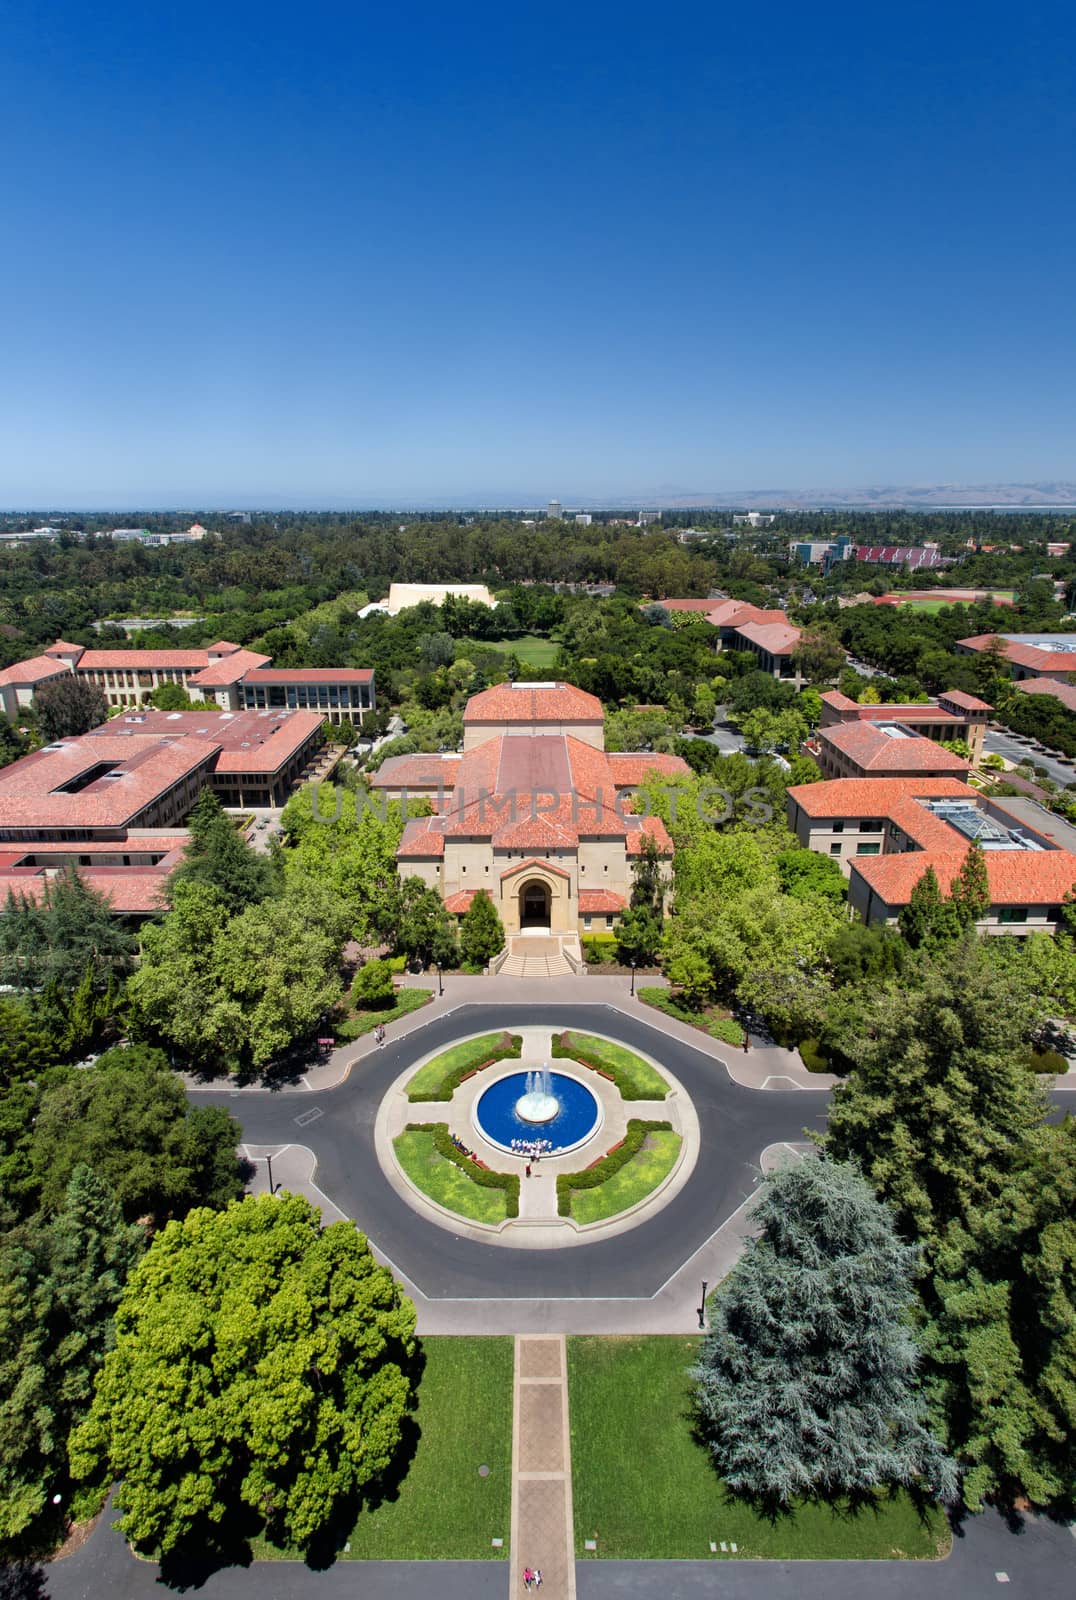 STANFORD, UNITED STATES - July 6: Overhead view Hoover Fountain on the campus of historic Standford University. July 6, 2013.